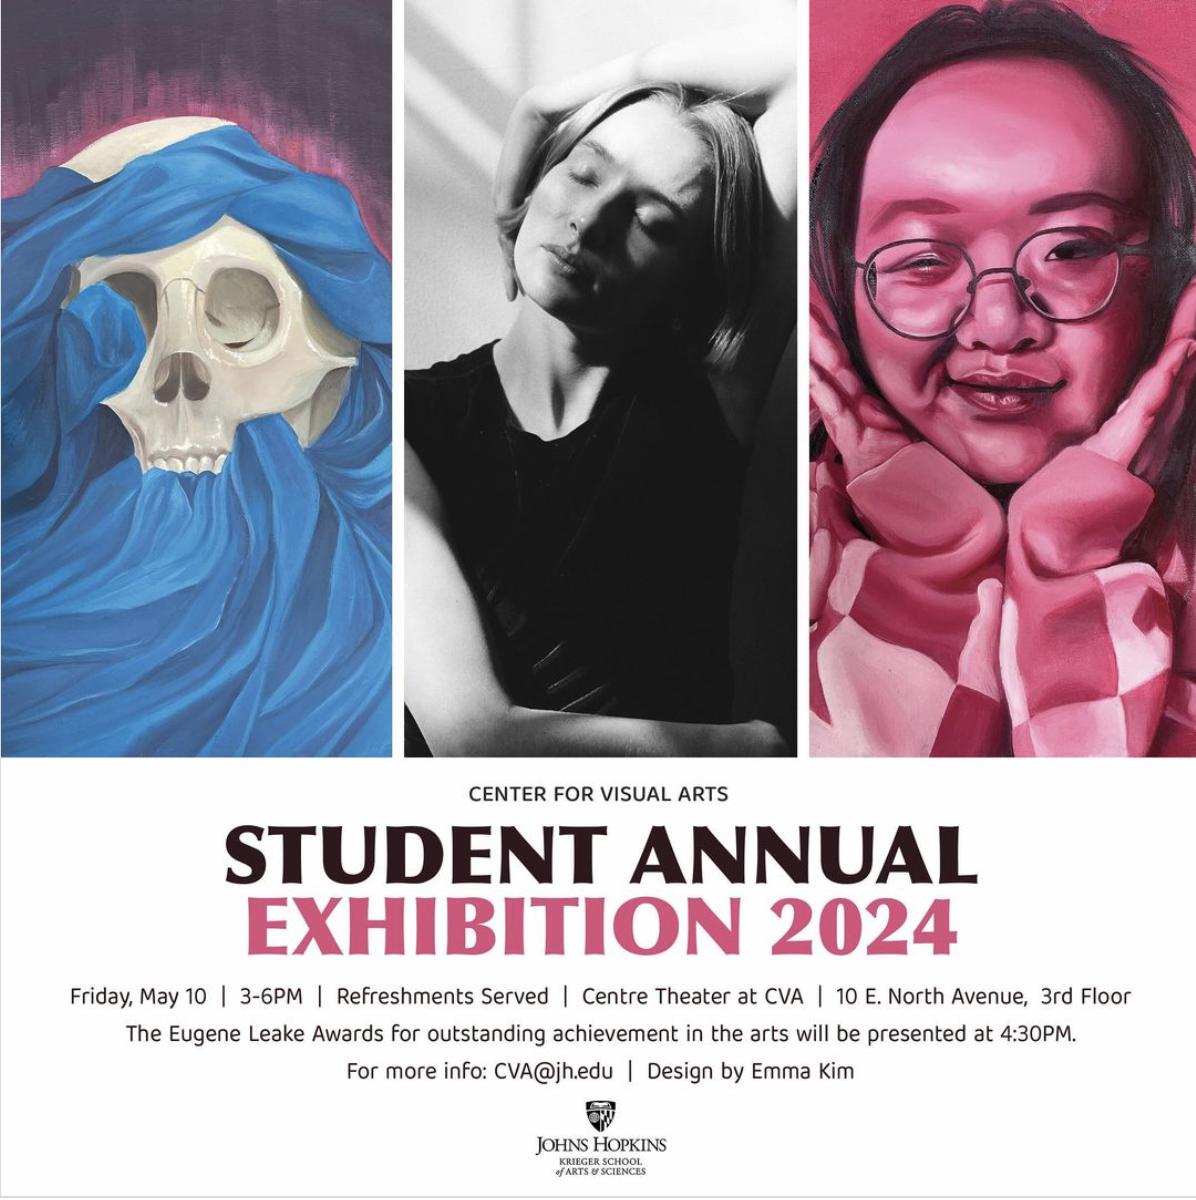 The Center for Visual Arts Student Annual Exhibition 2024.